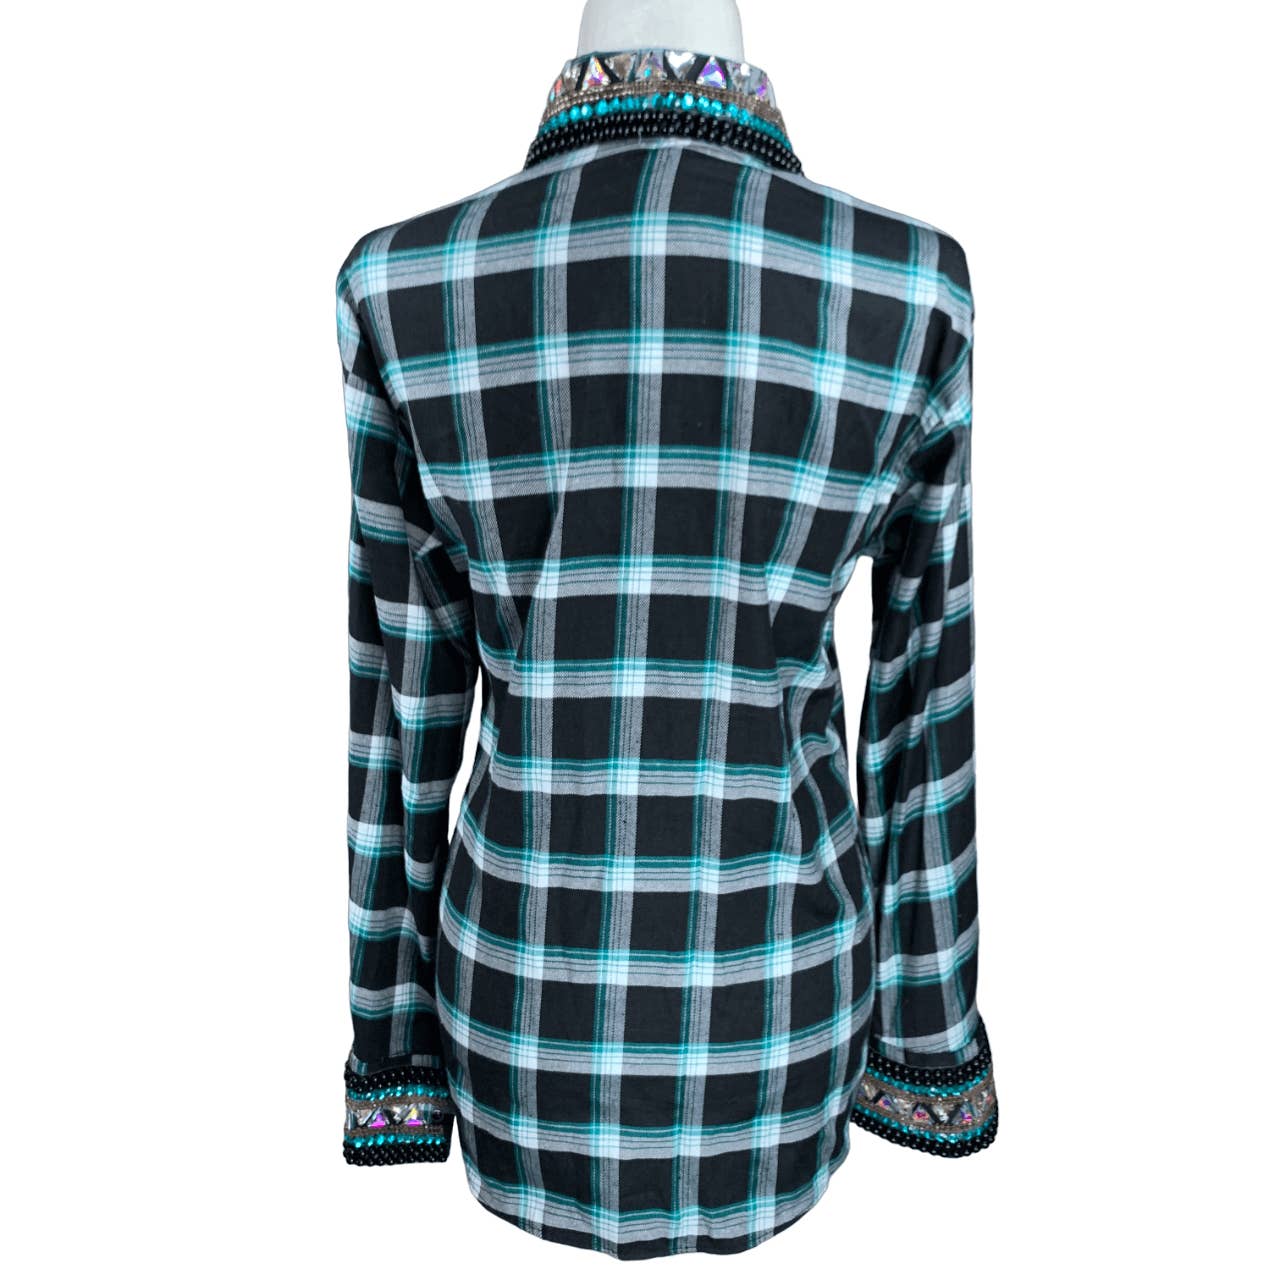 Custom Western Show Shirt in Green & Gray Plaid - Woman's Large